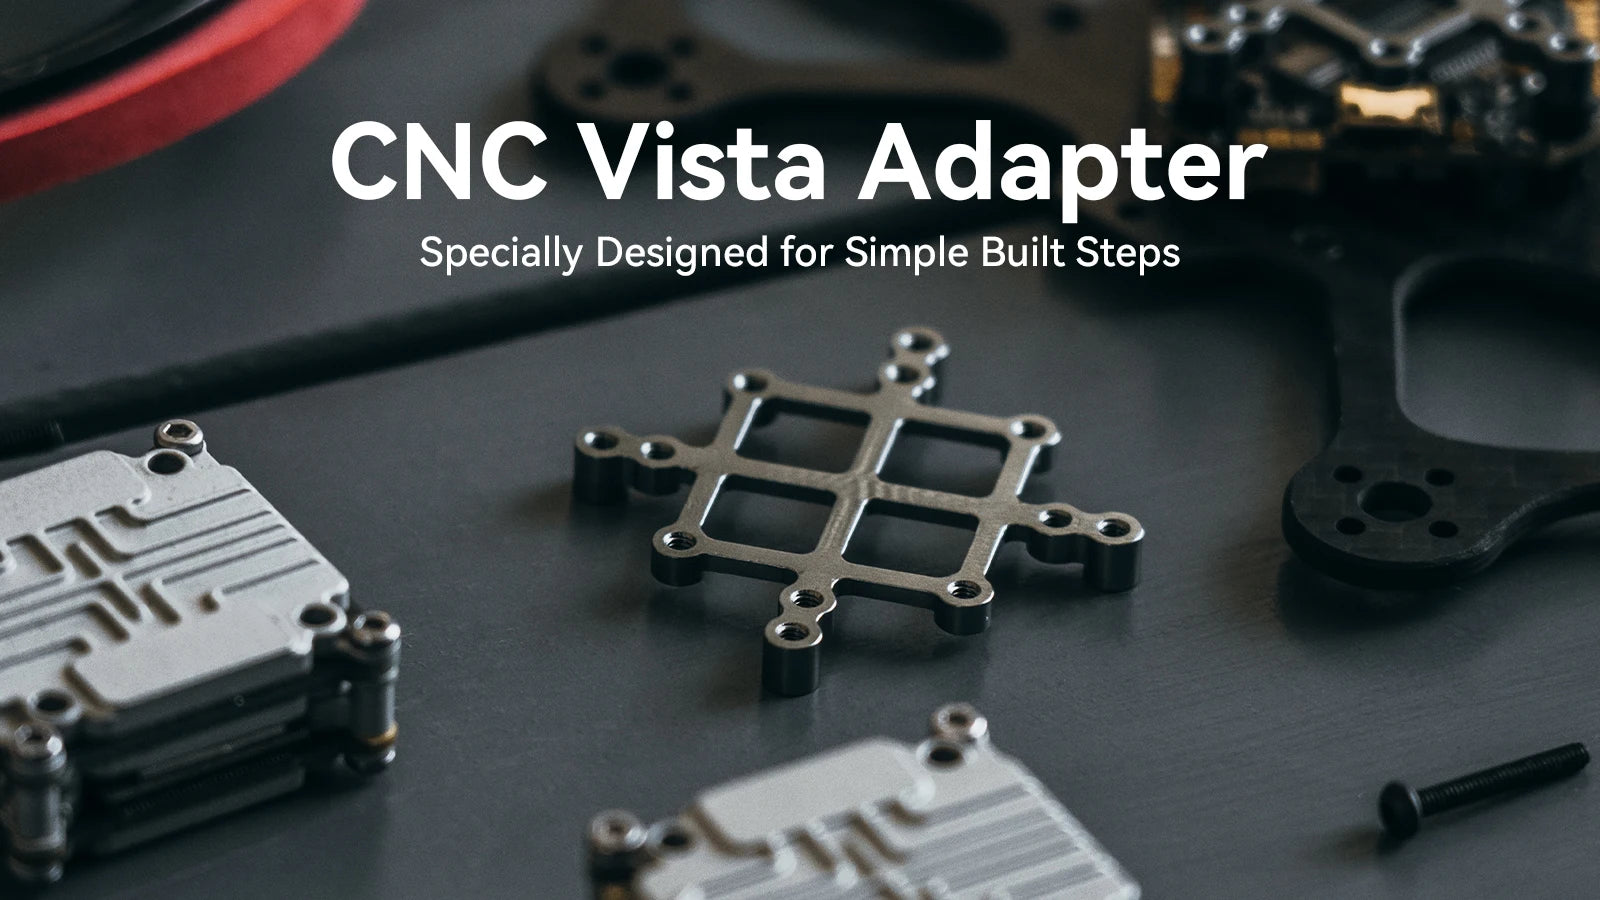 BETAFPV Pavo25 Whoop FPV, CNC Vista Adapter Specially Designed for Simple Built Step